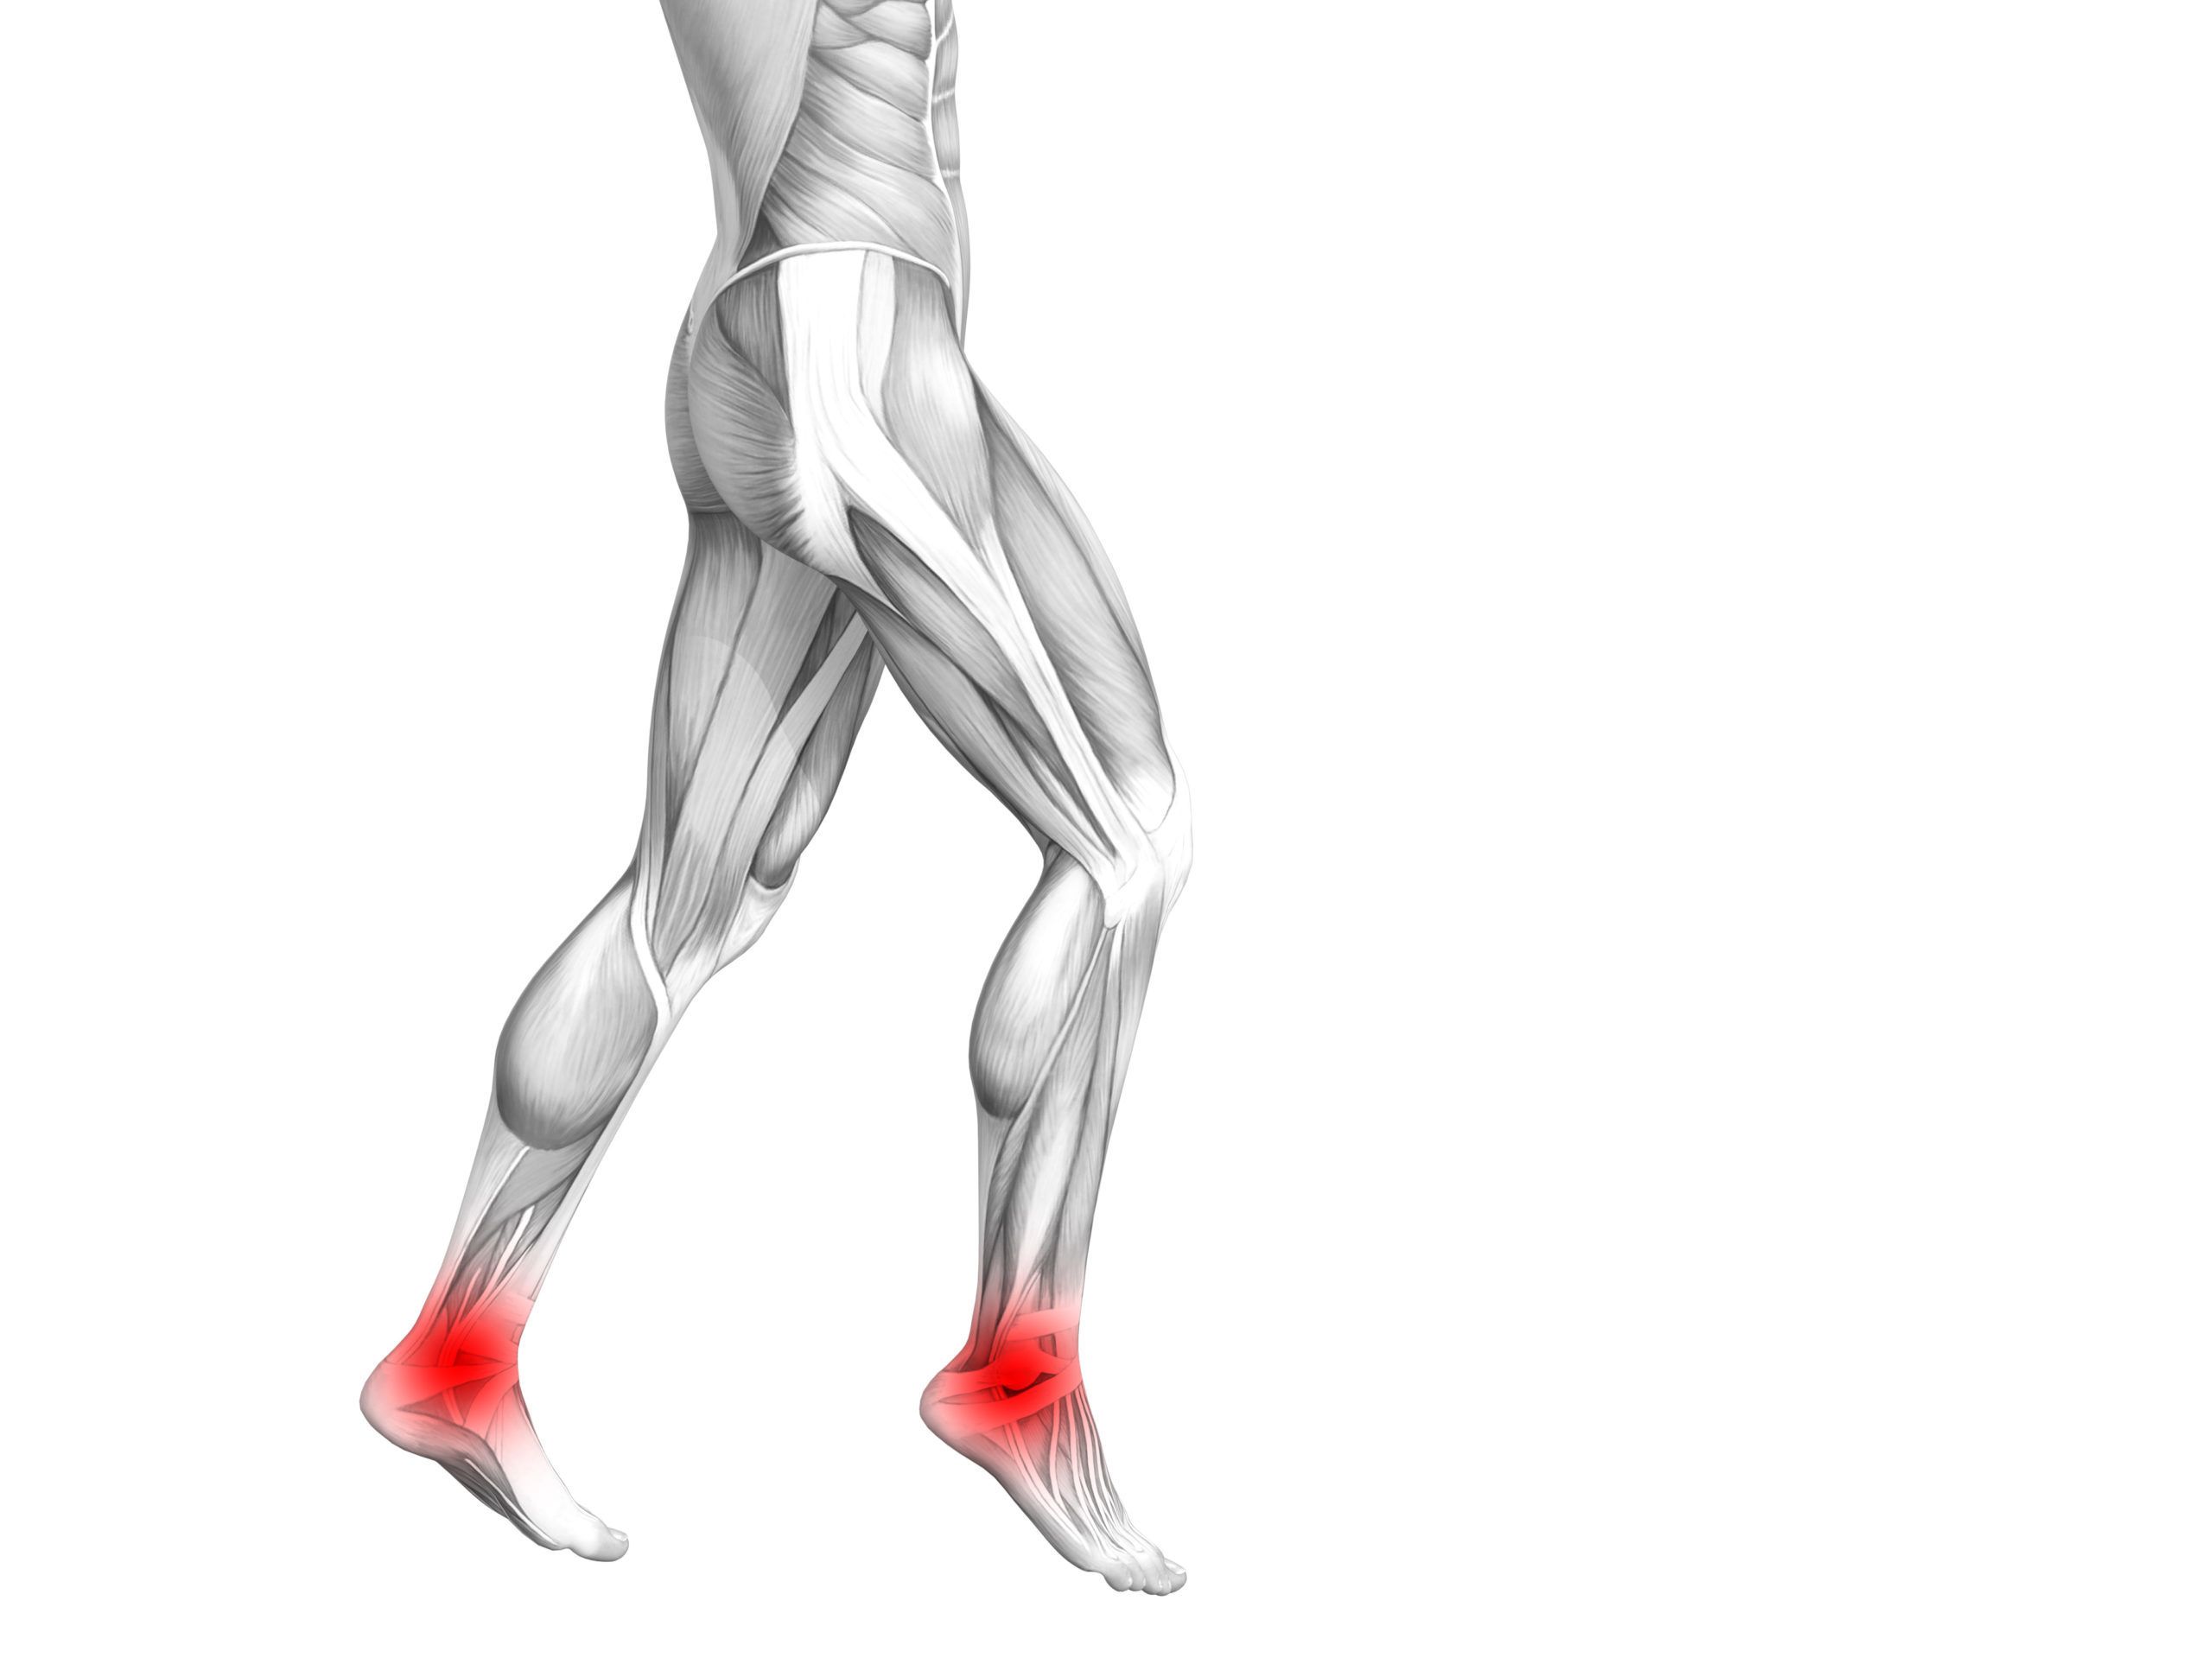 Illustration of muscle strain in ankles